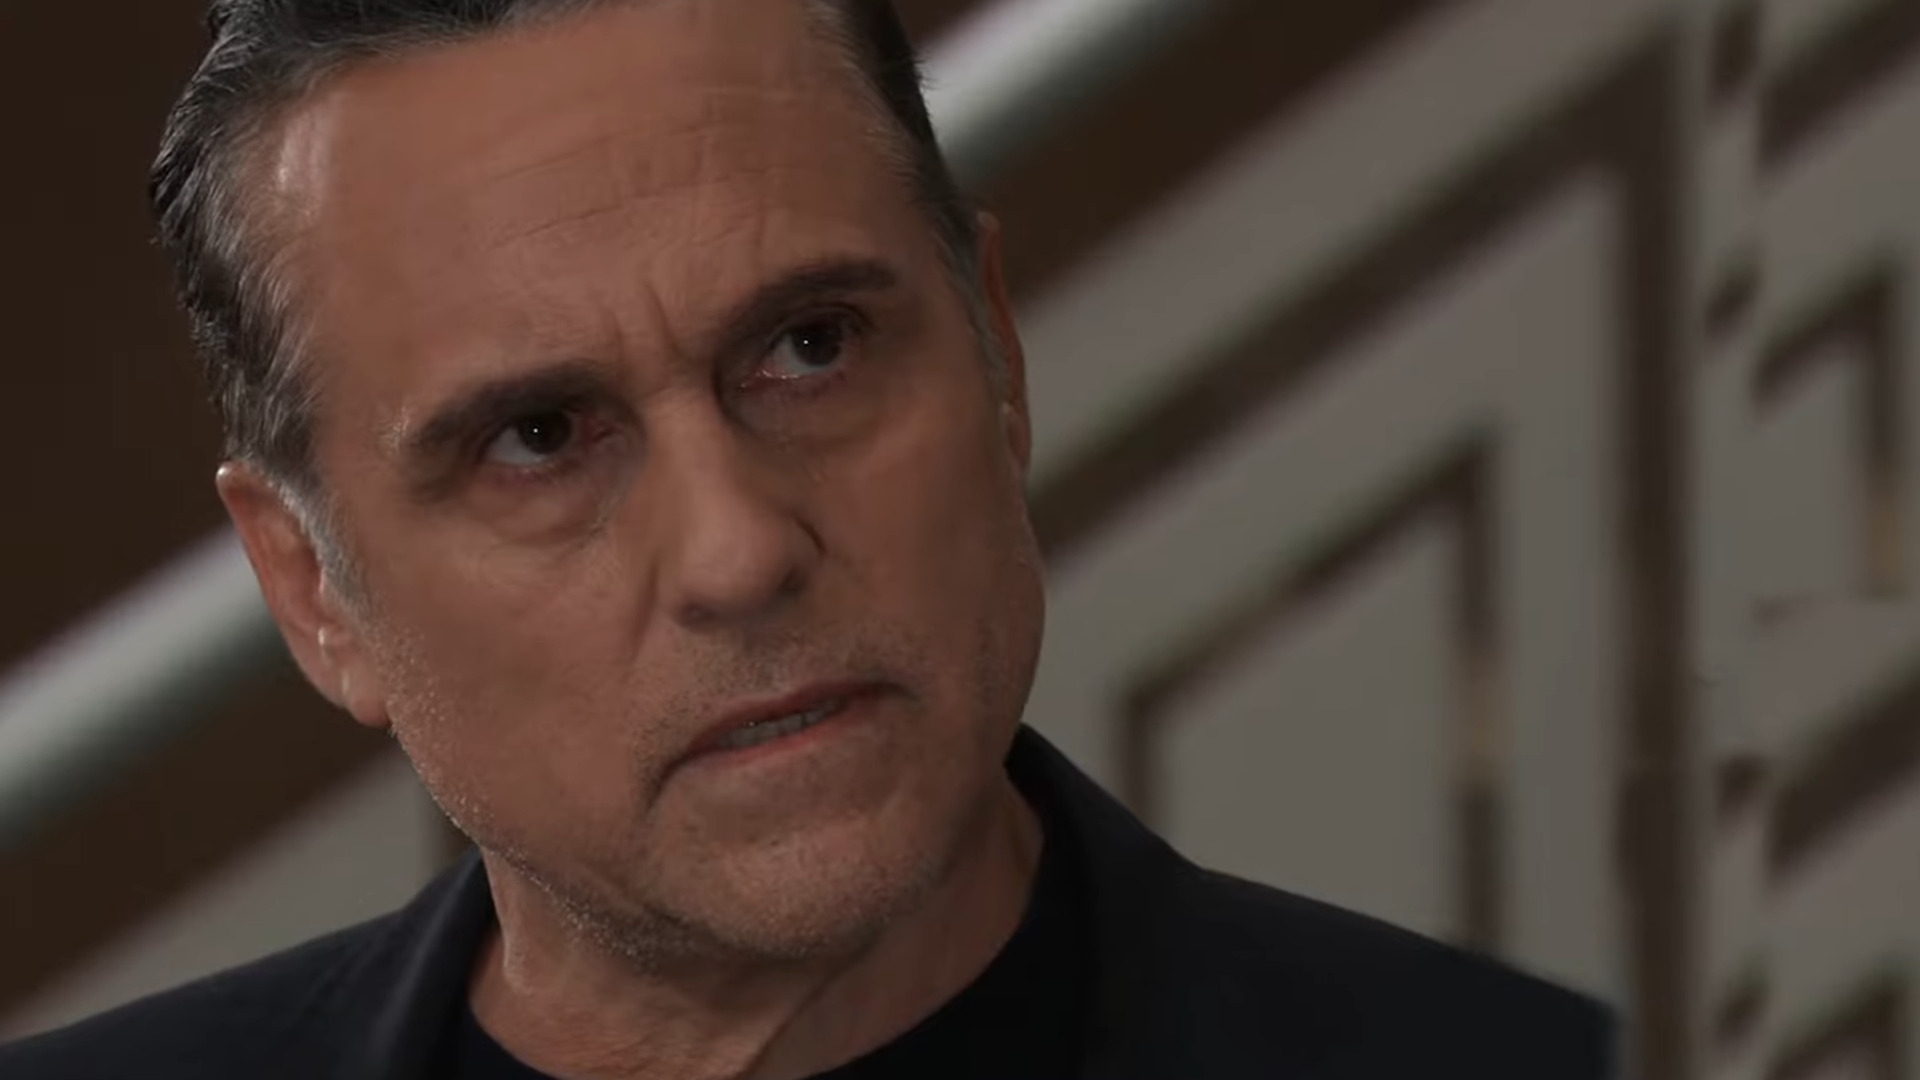 sonny question GH recaps SoapsSpoilers